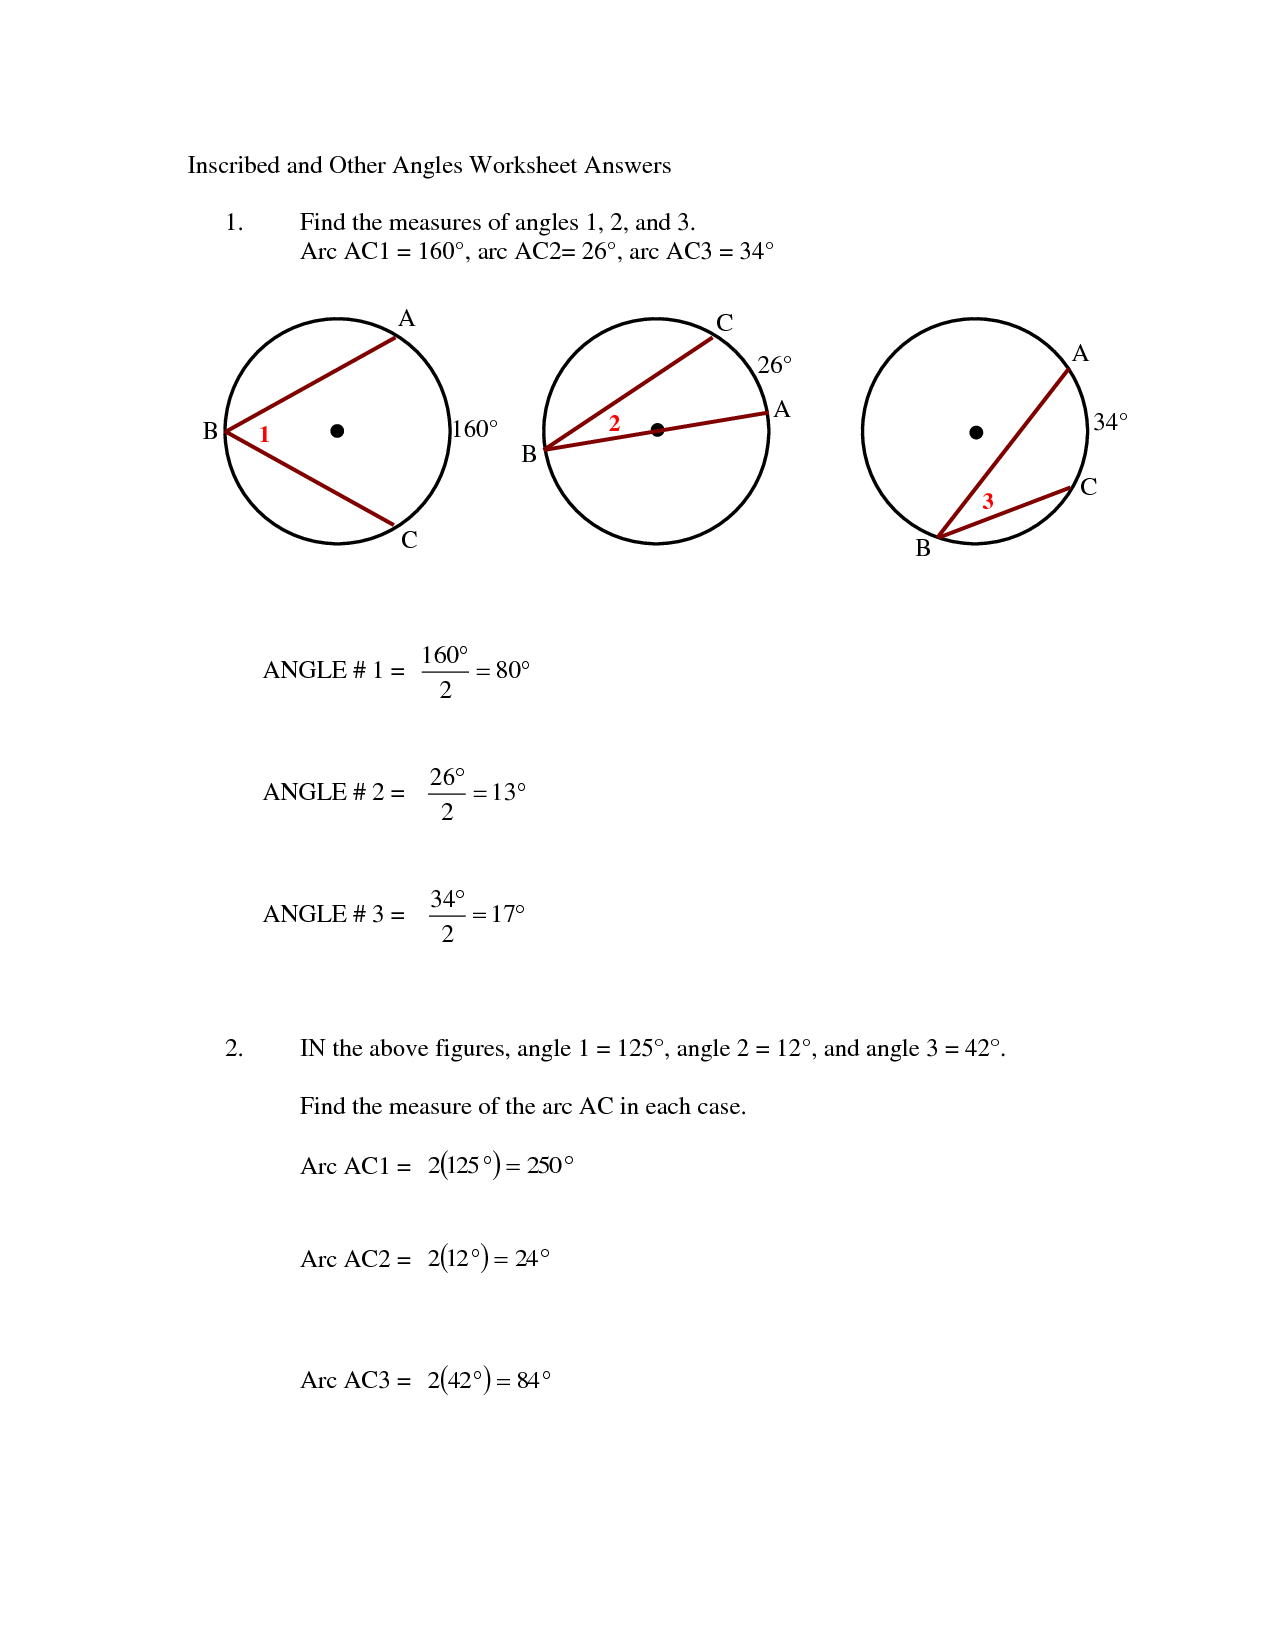 angles-in-inscribed-quadrilaterals-worksheet